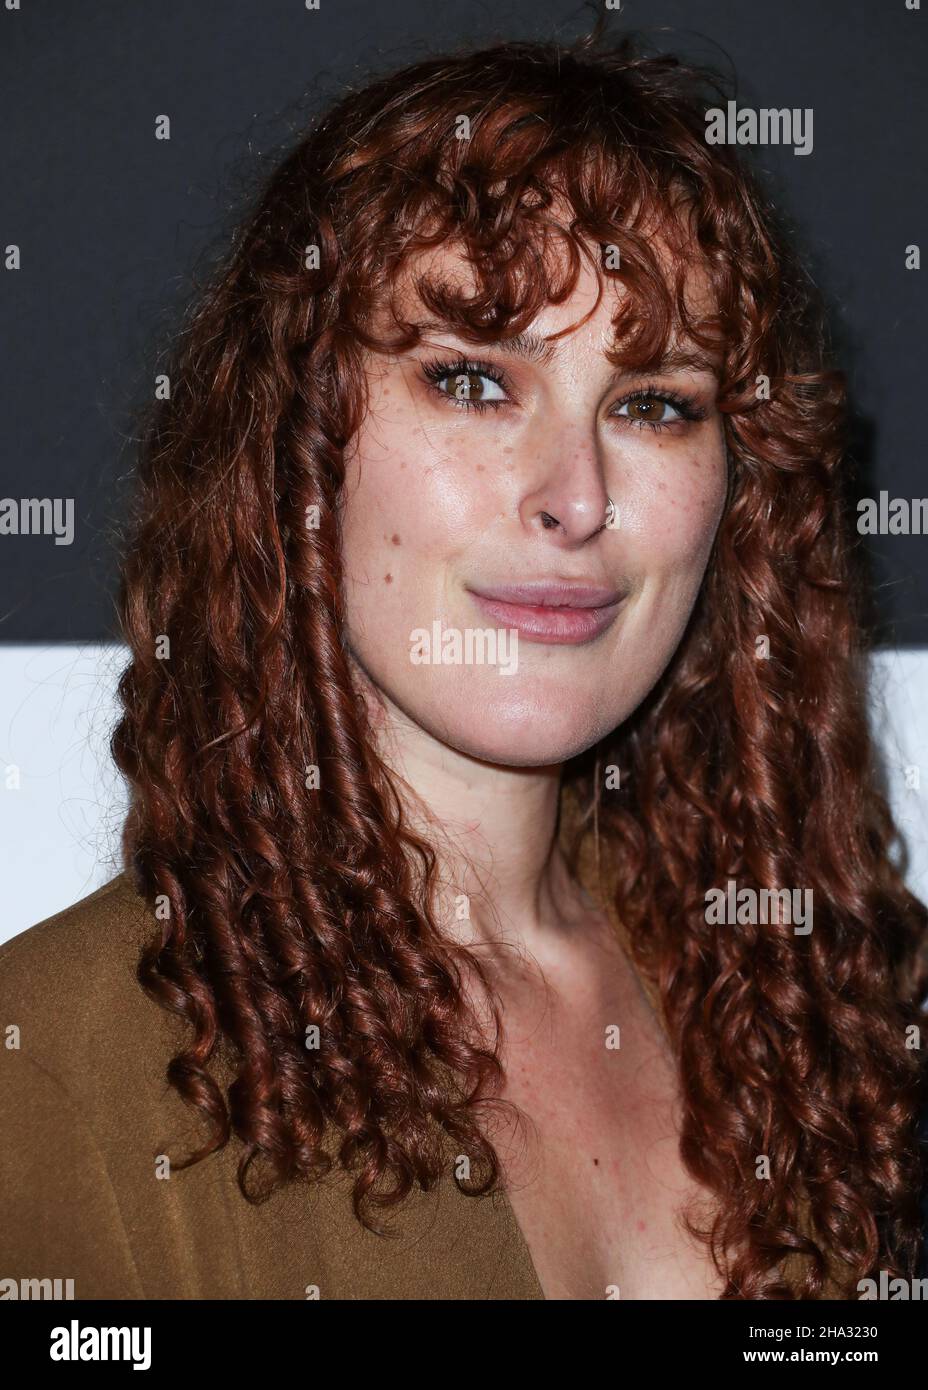 actress with frizzy red hair